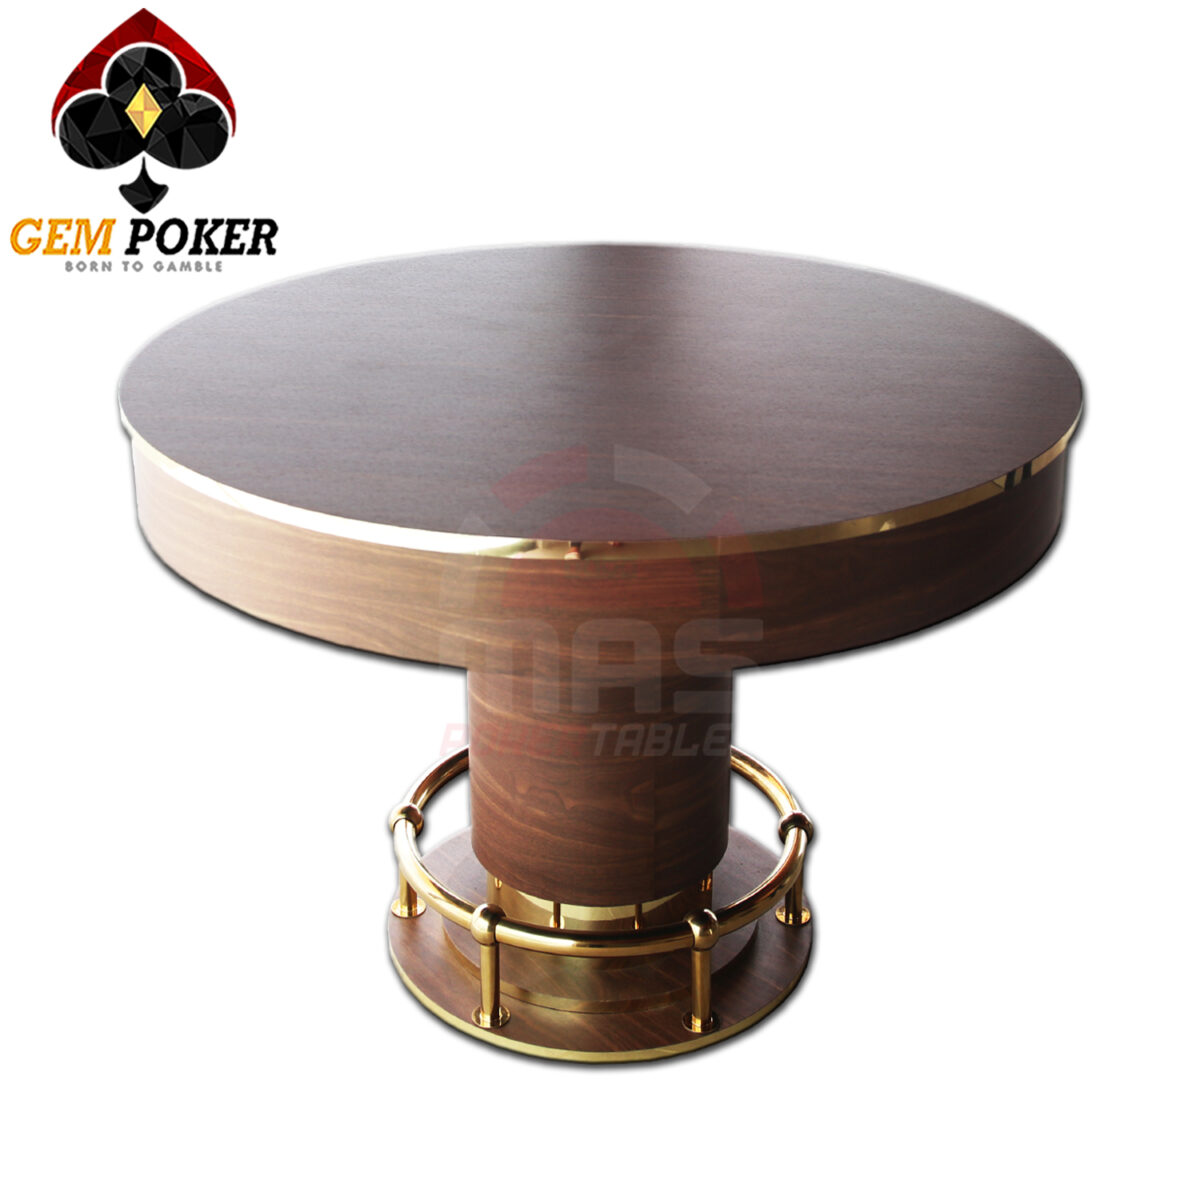 ROUND POKER TABLE WITH COVER - P57